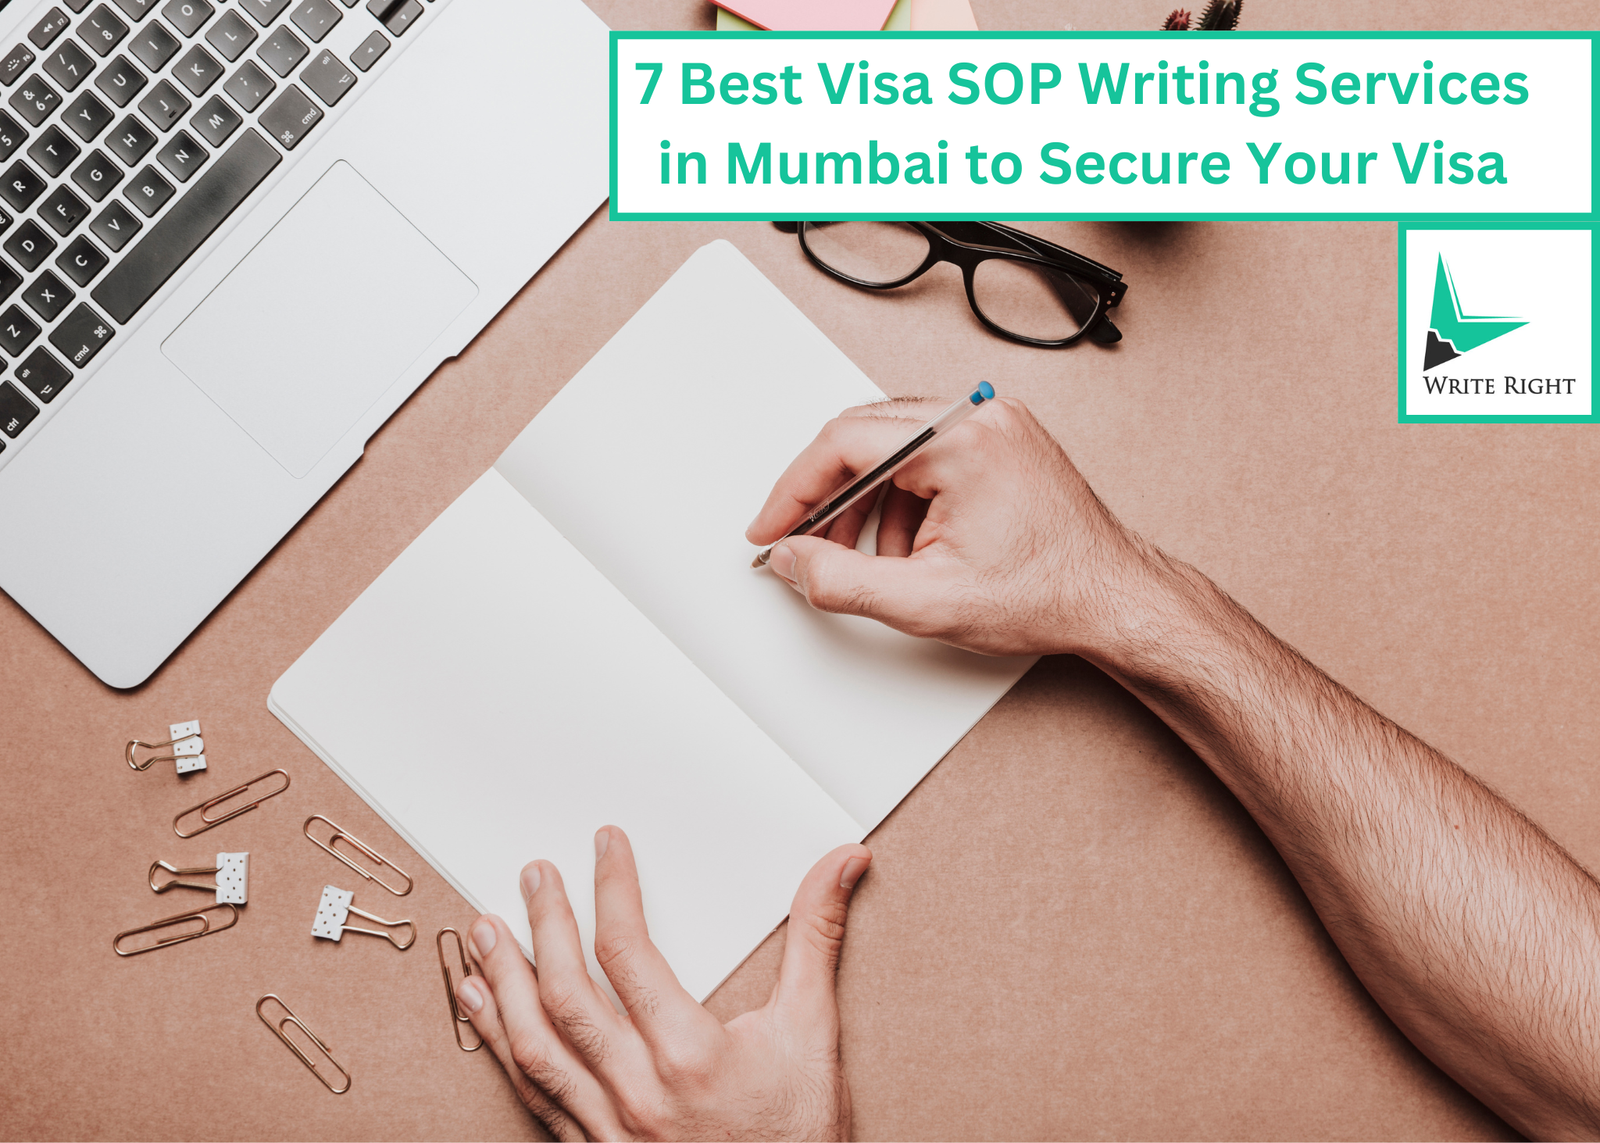 7 Best Visa SOP Writing Services in Mumbai to Secure Your Visa